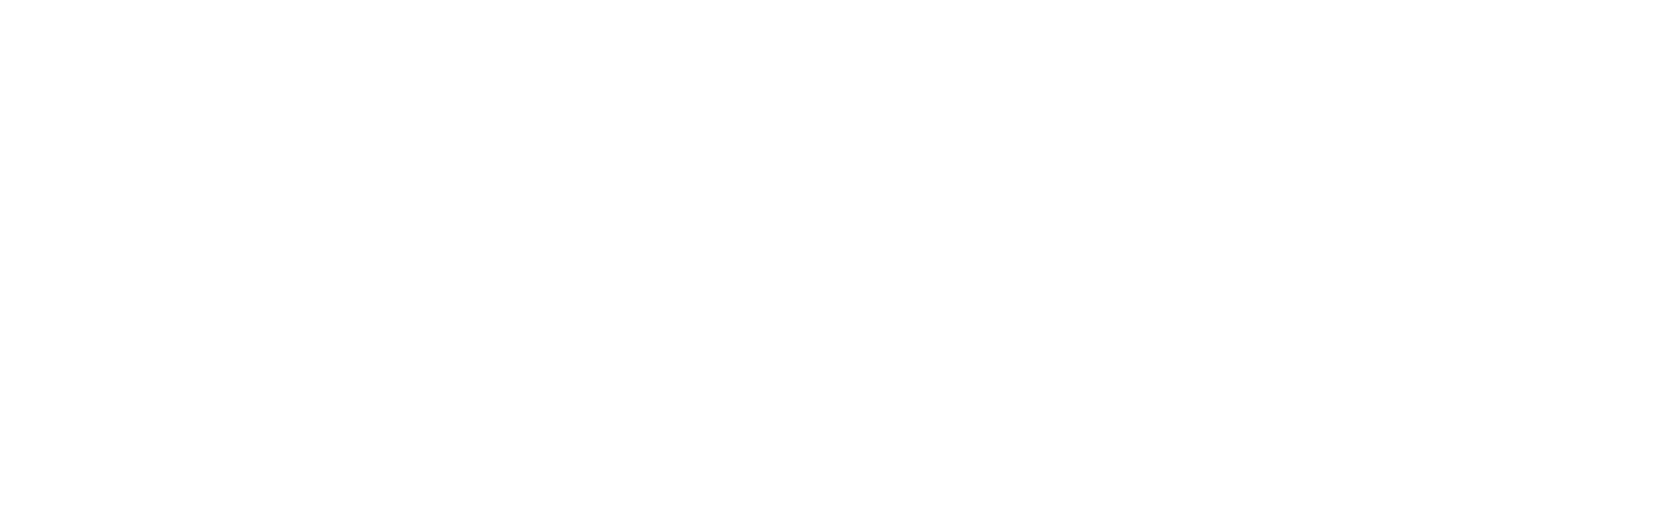 FTP Today - Secure FTP Hosting Service